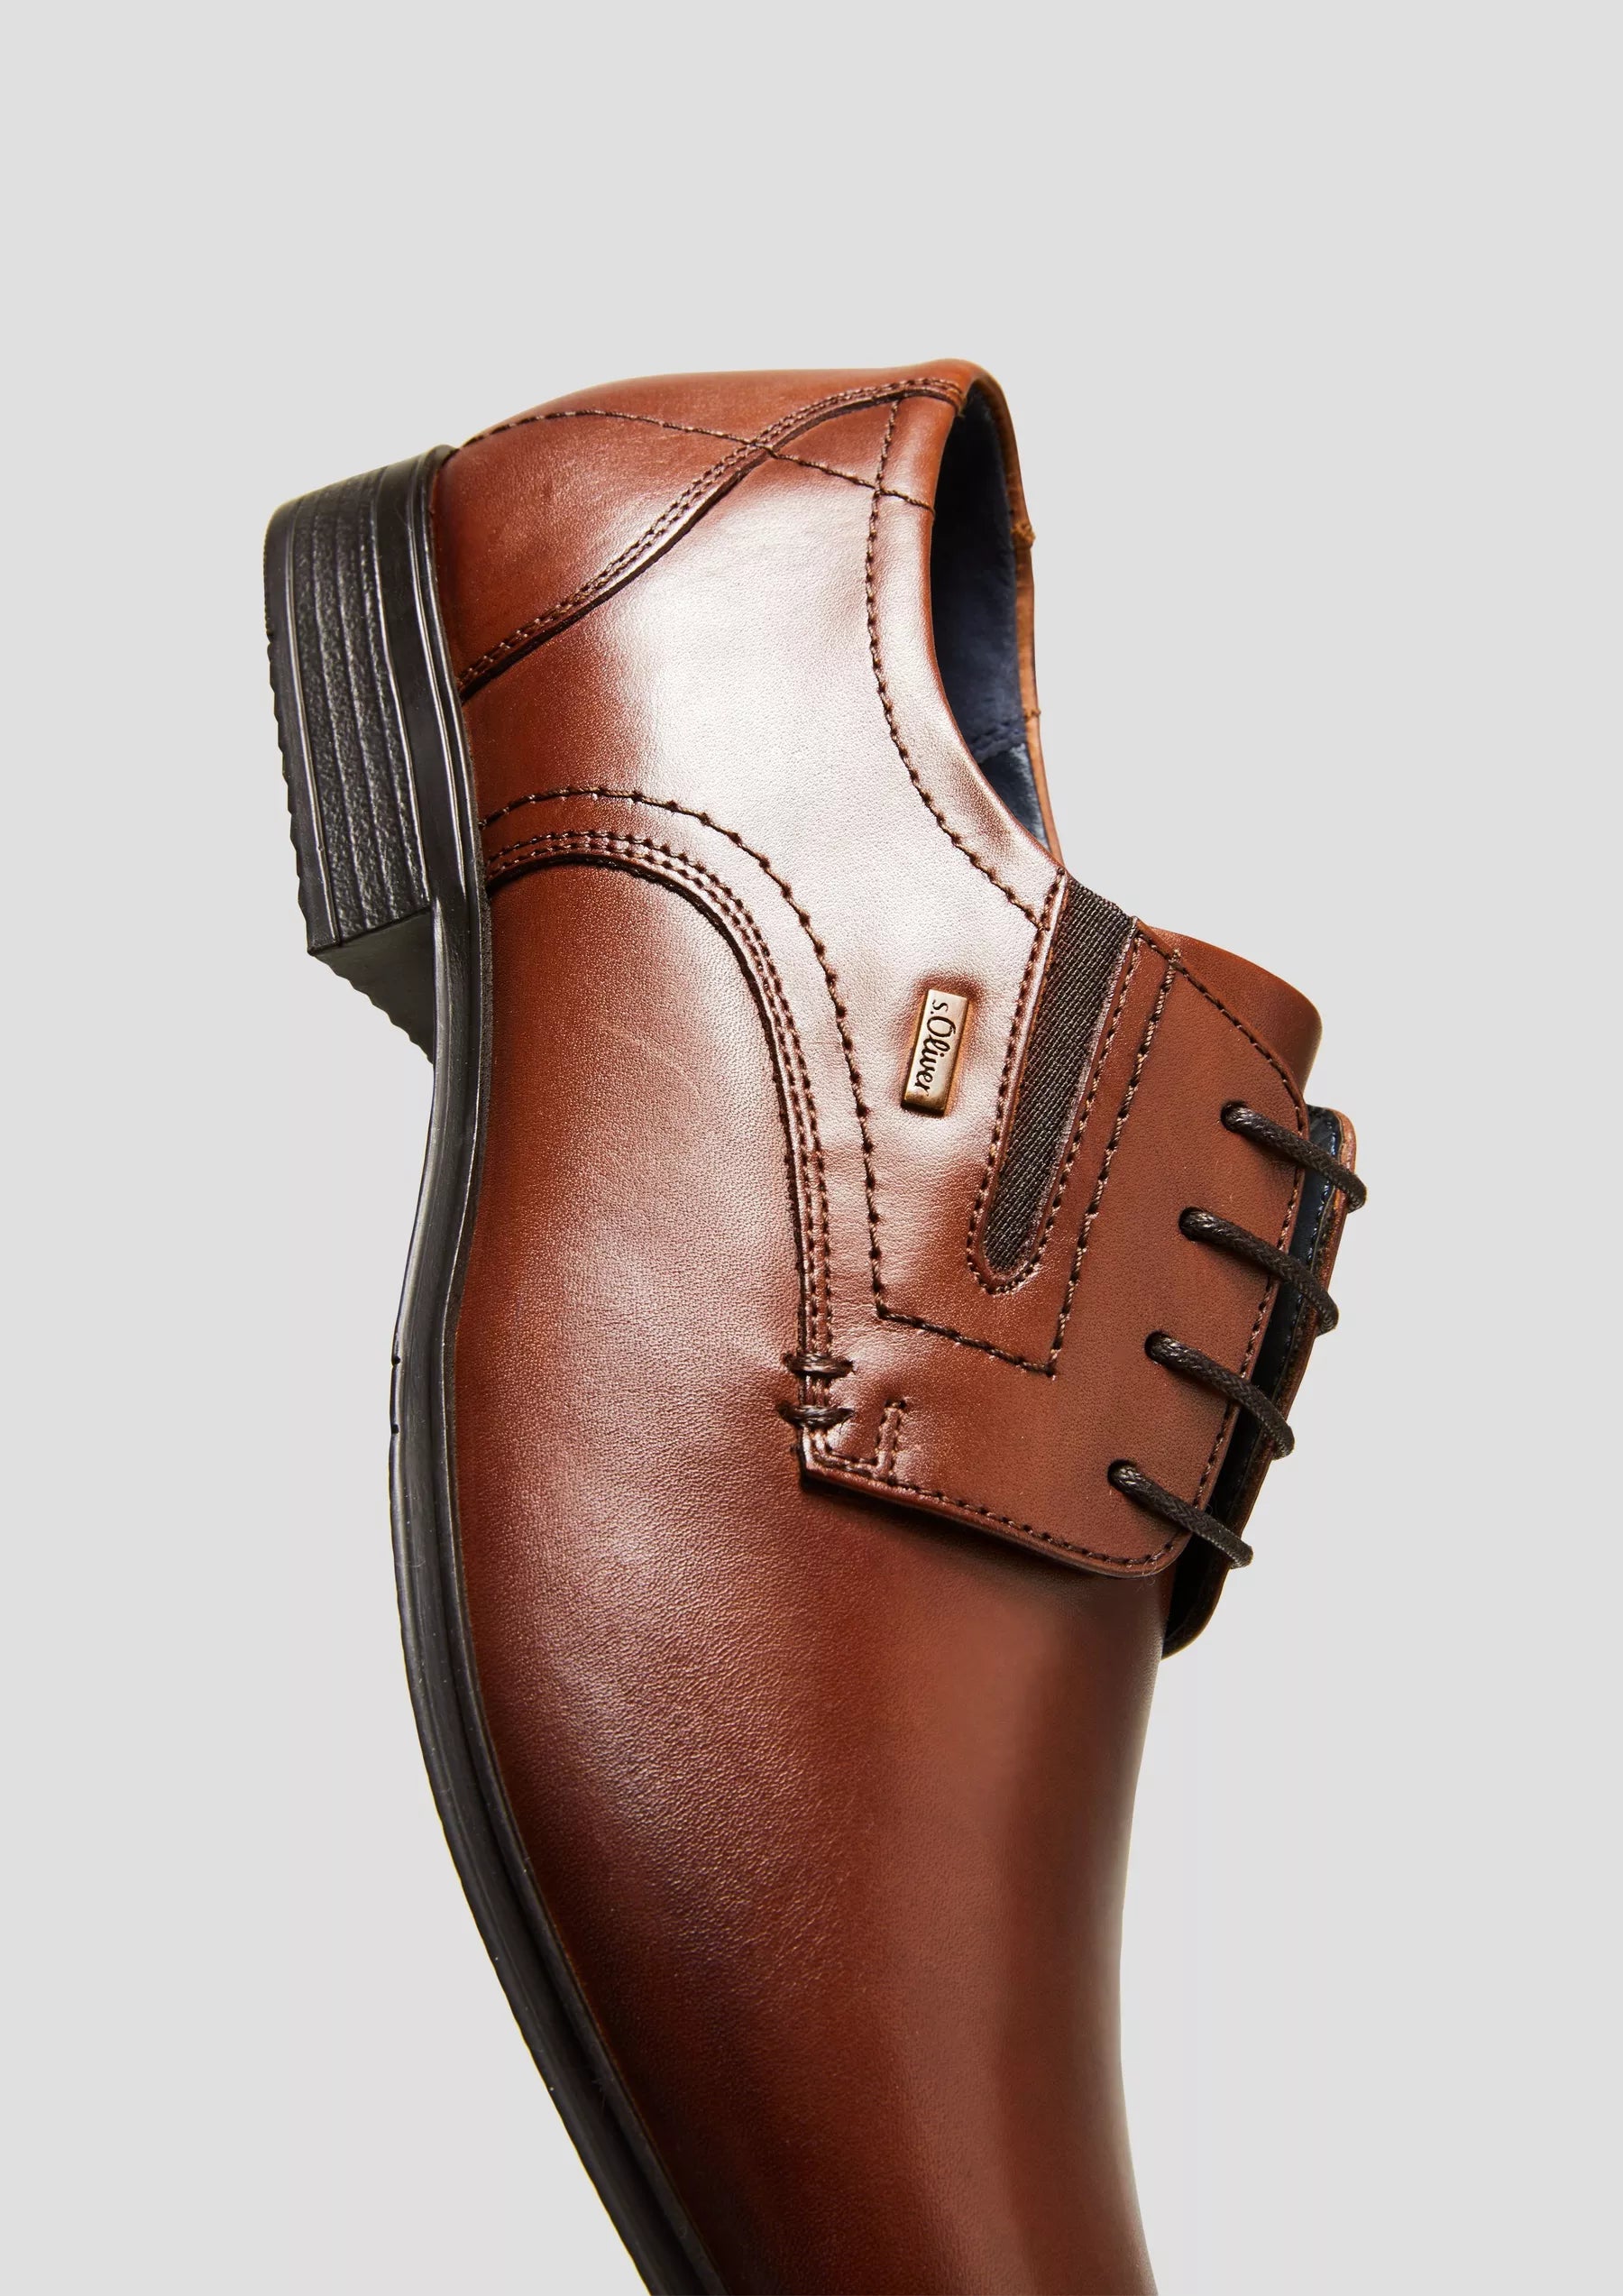 Men's Classic Lace-Up Shoes in Leather